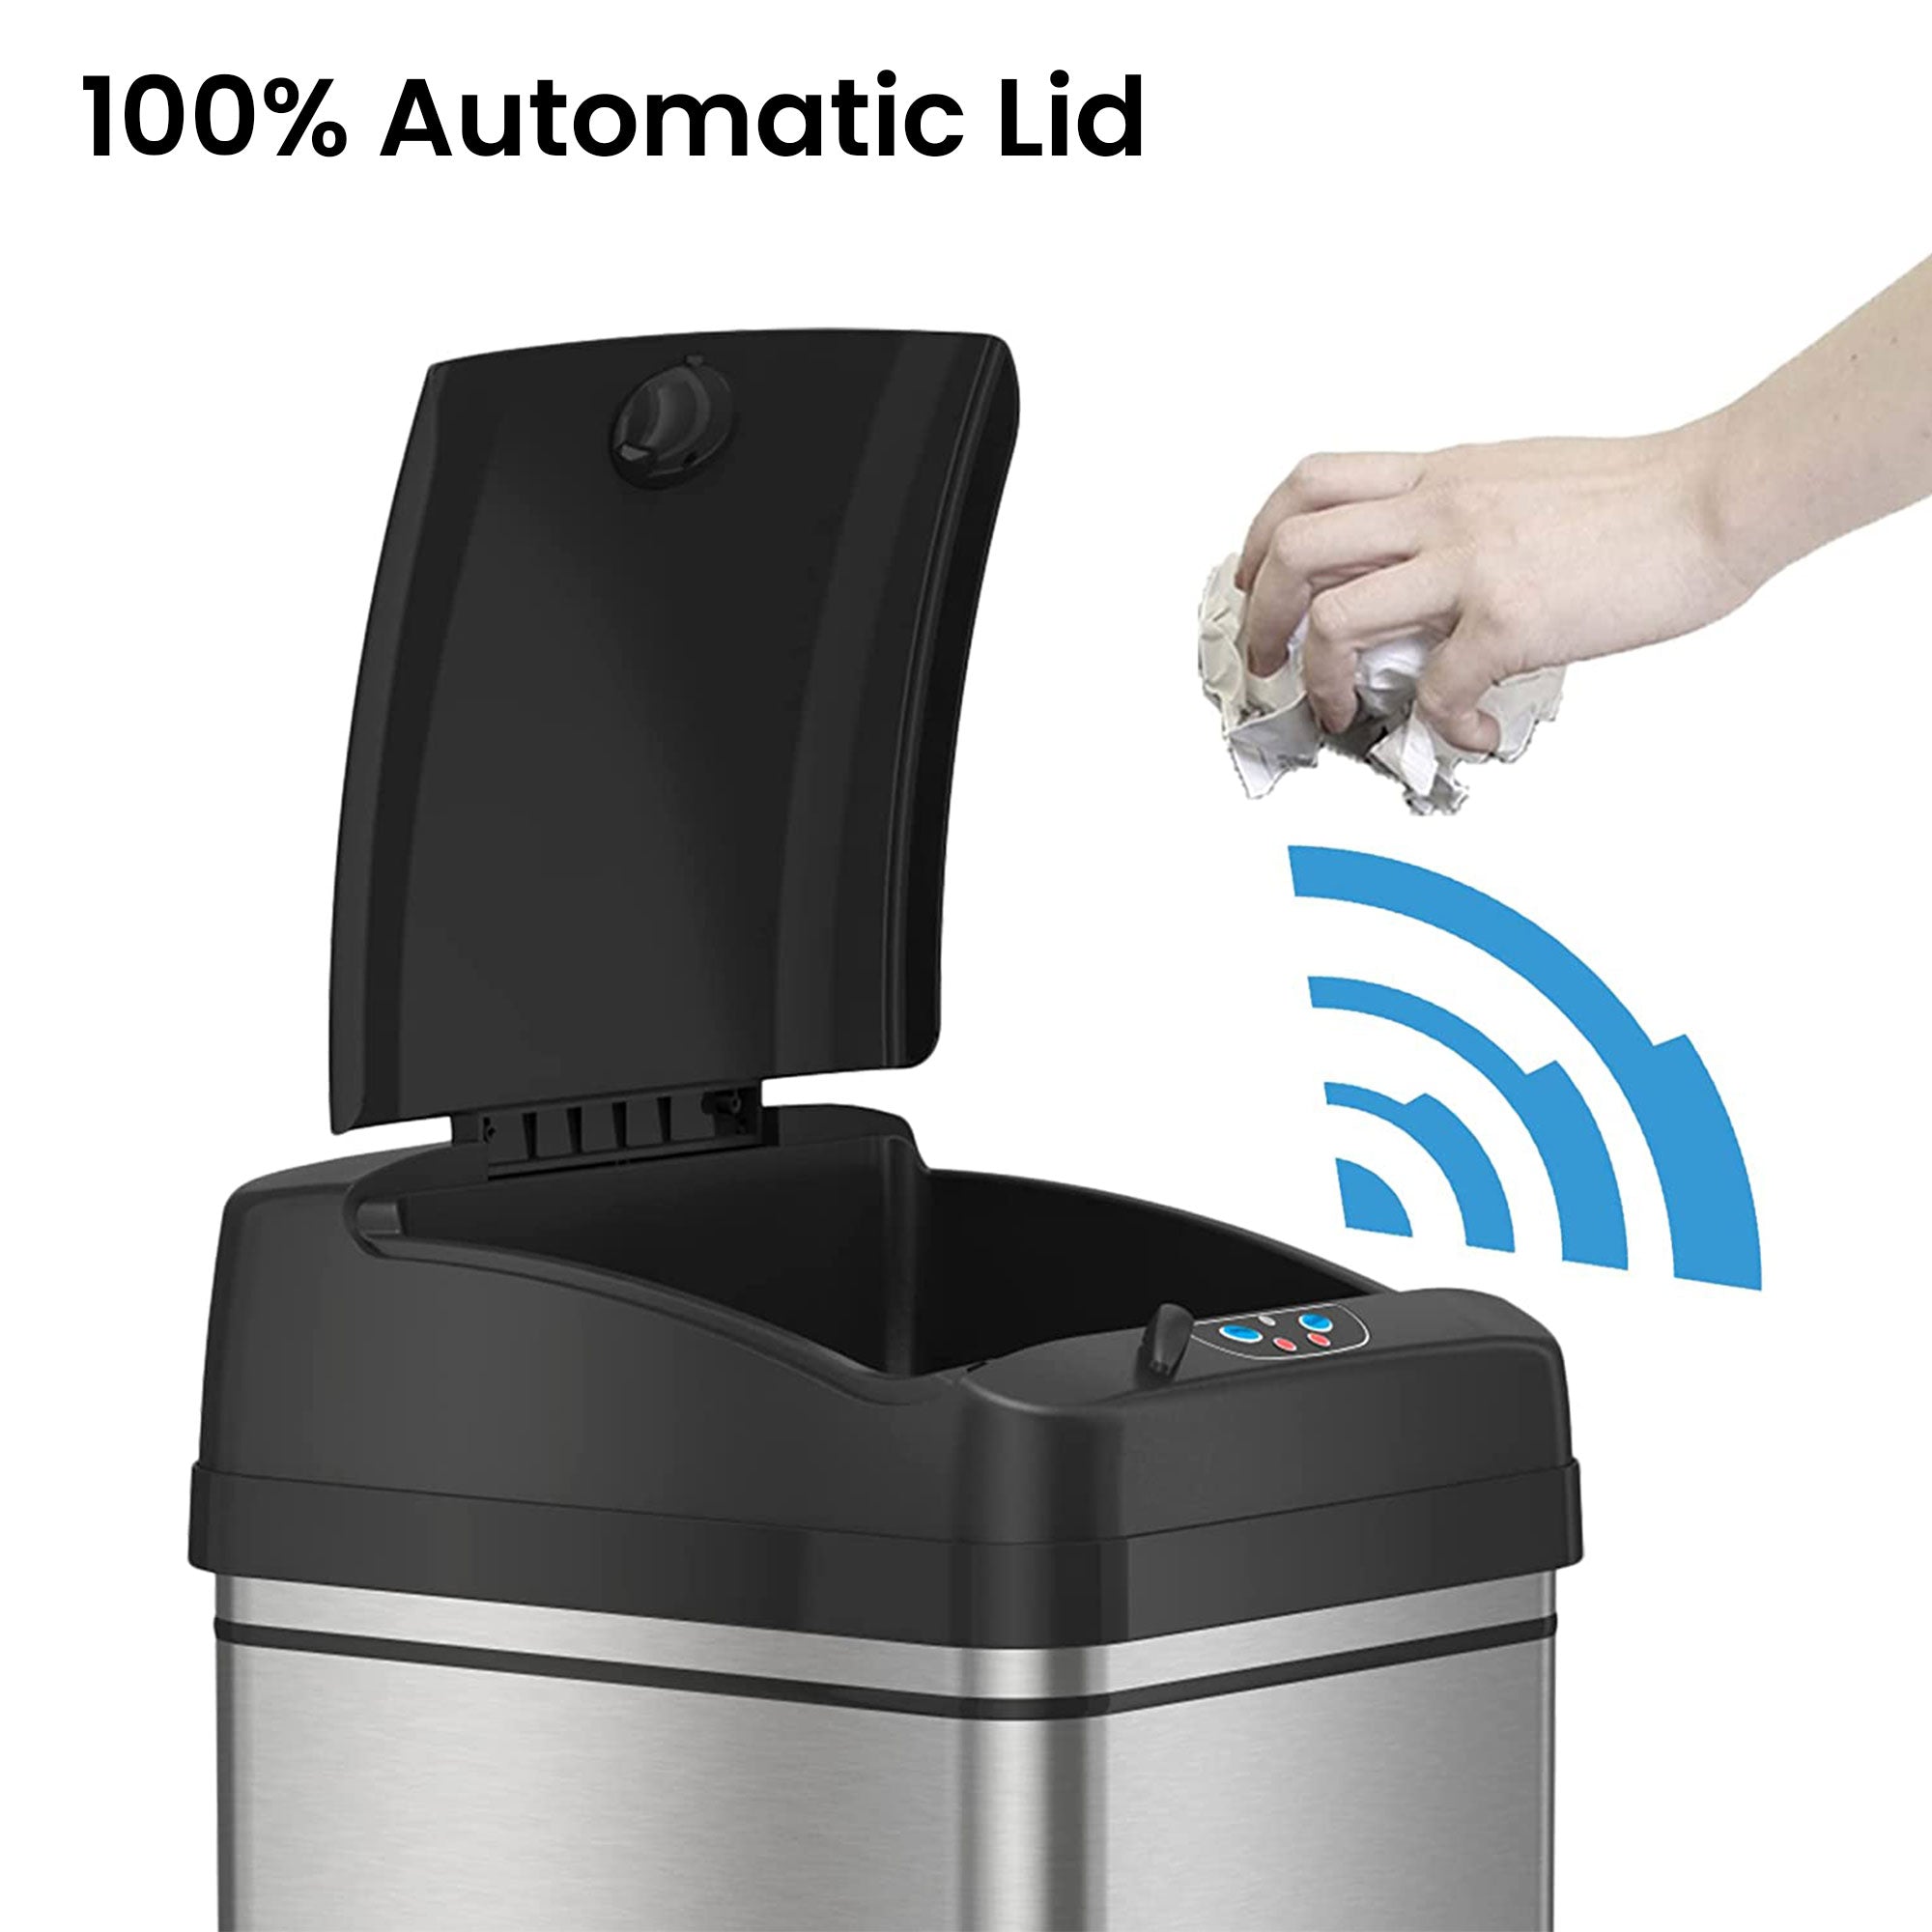 13 Gallon Sensor Trash Can – iTouchless Housewares and Products Inc.